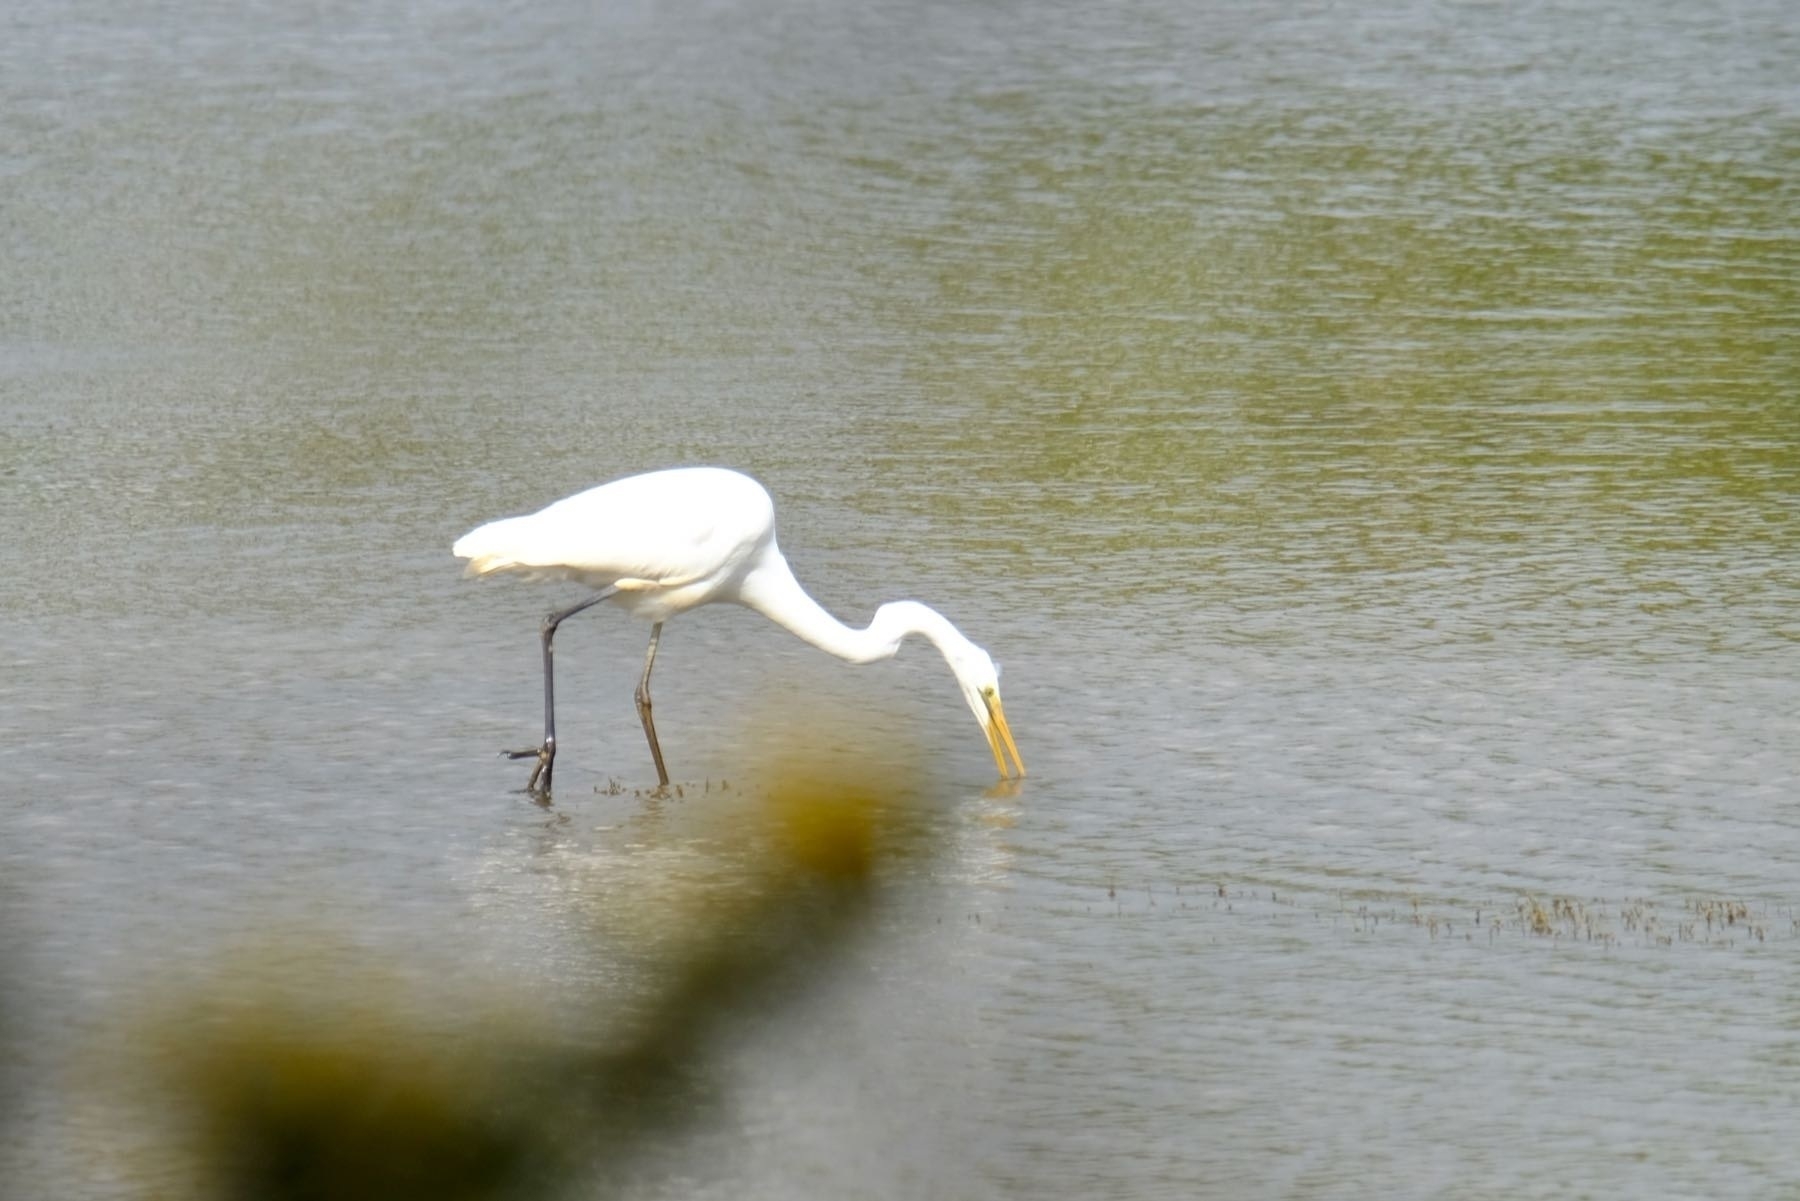 Large white bird wading and feeding in the river. 